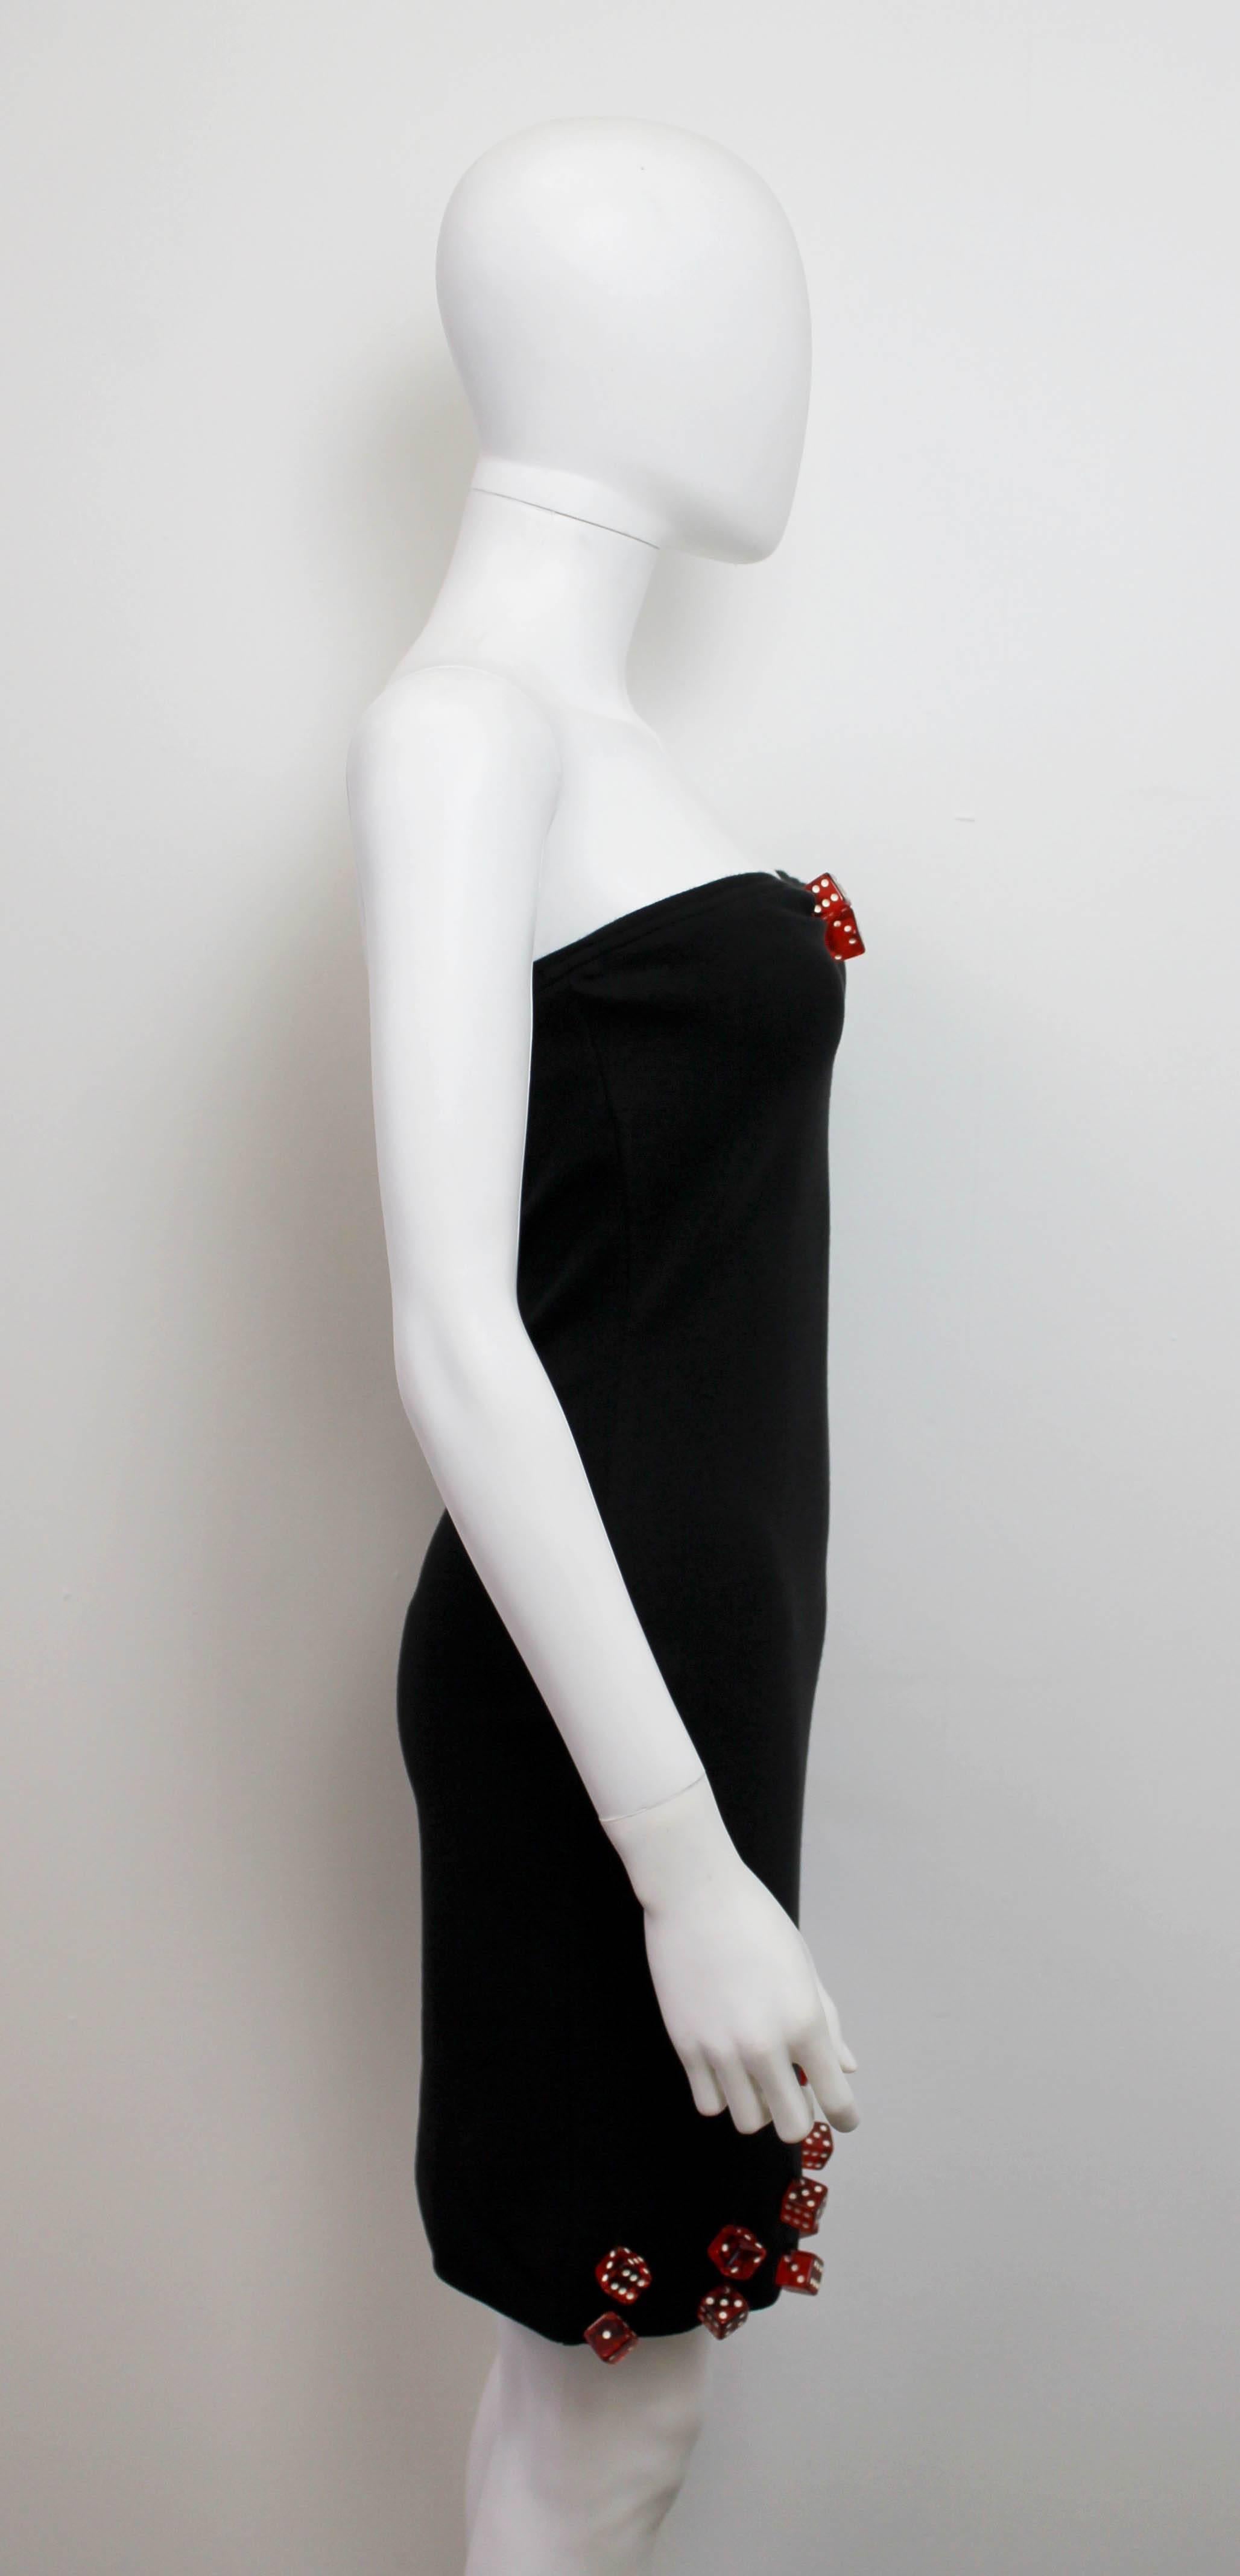 Iconic mini dress by Patrick Kelly from 1988. Features red dice details and a mini tube shape.